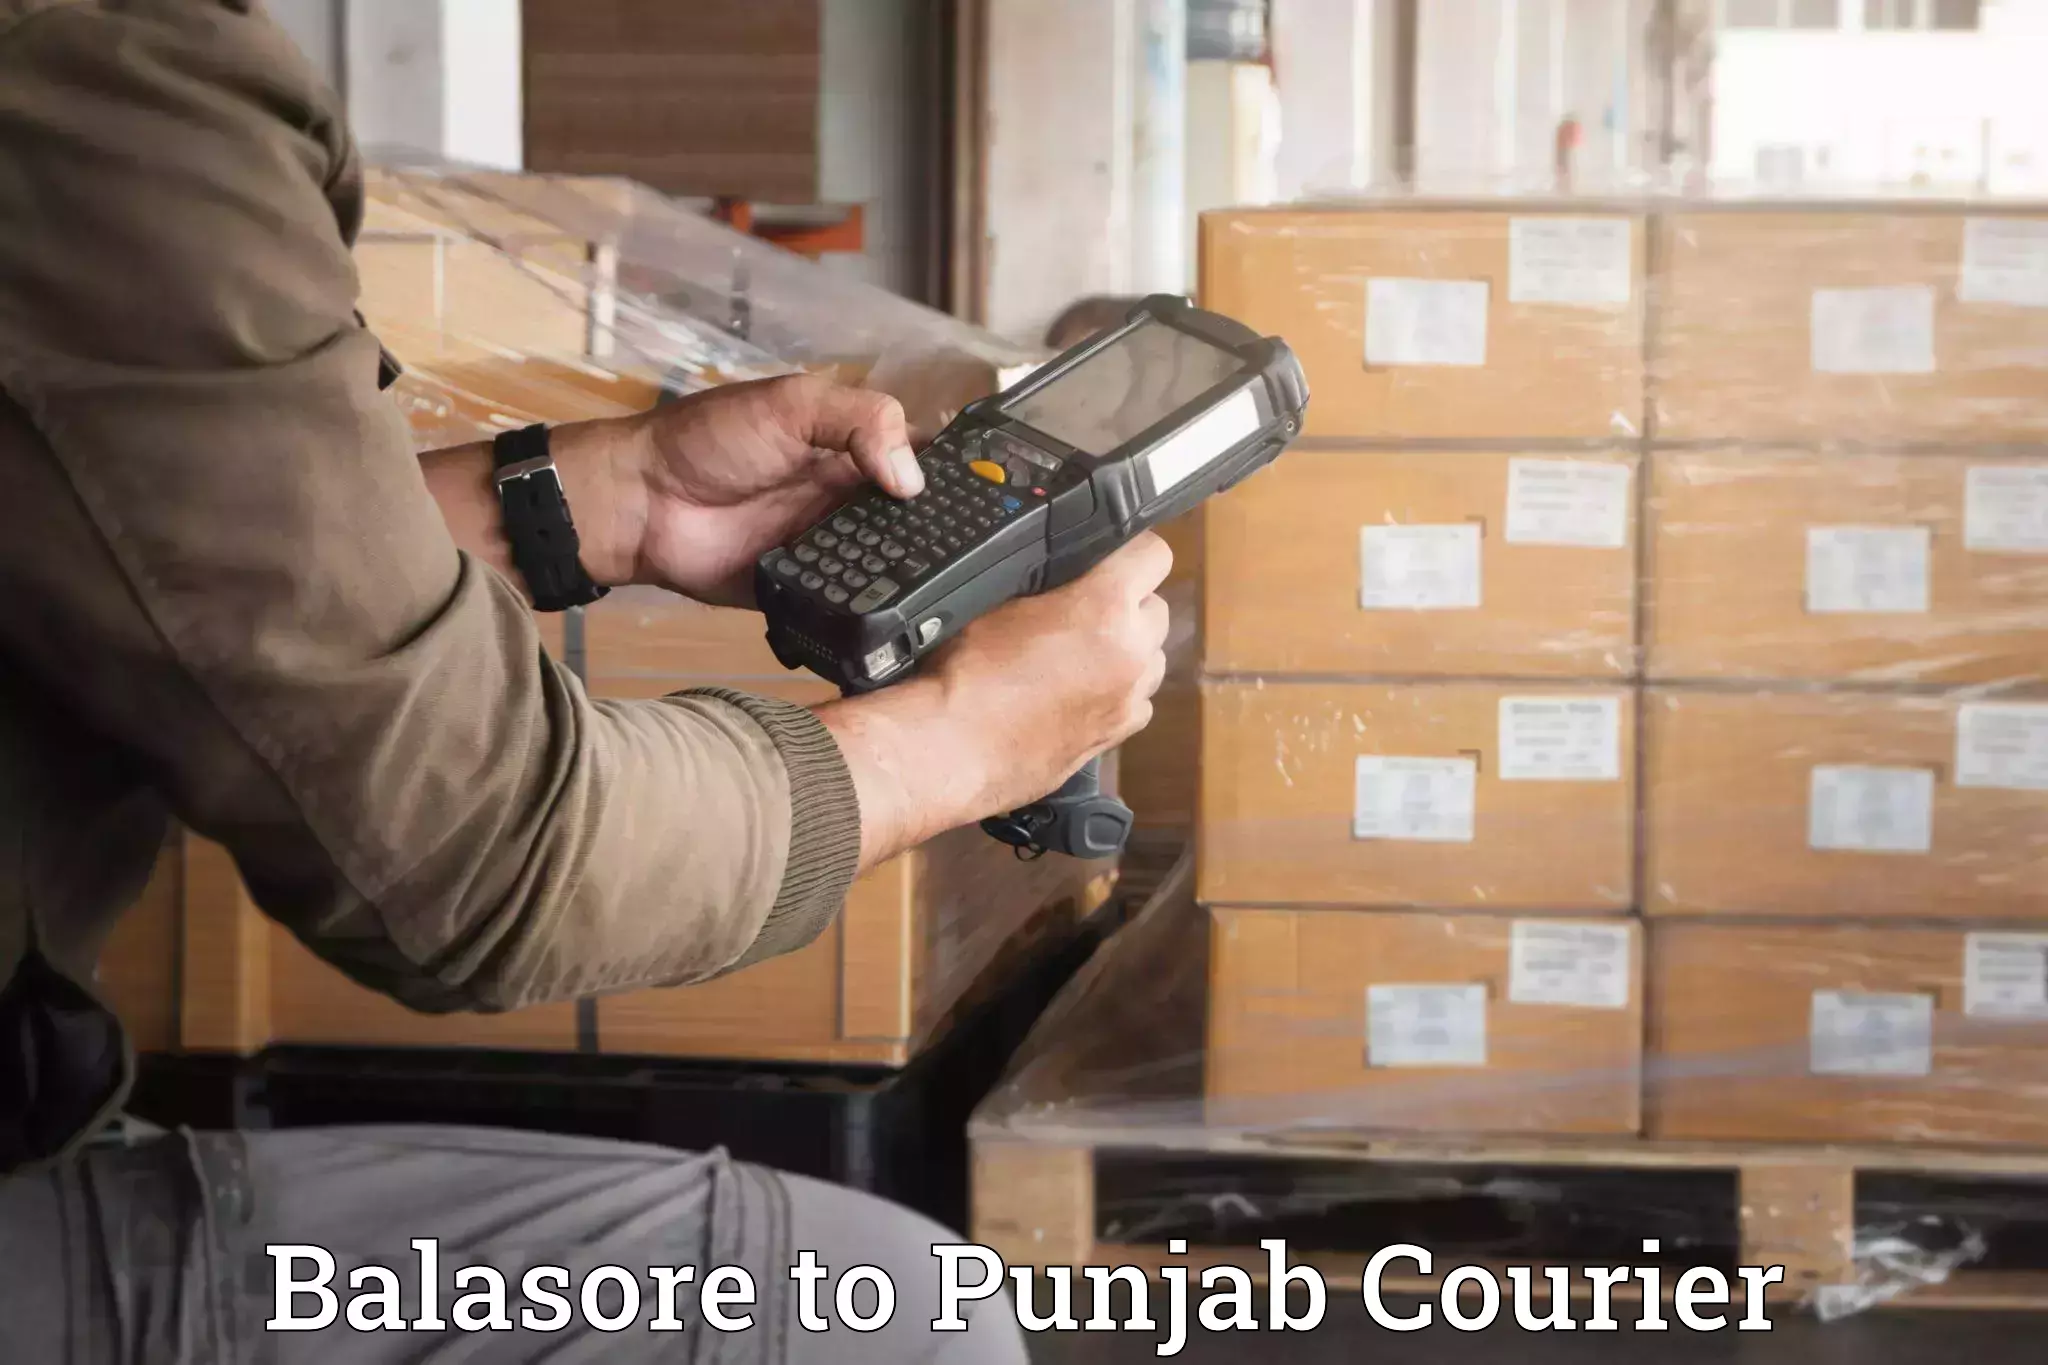 Furniture moving specialists Balasore to Amritsar